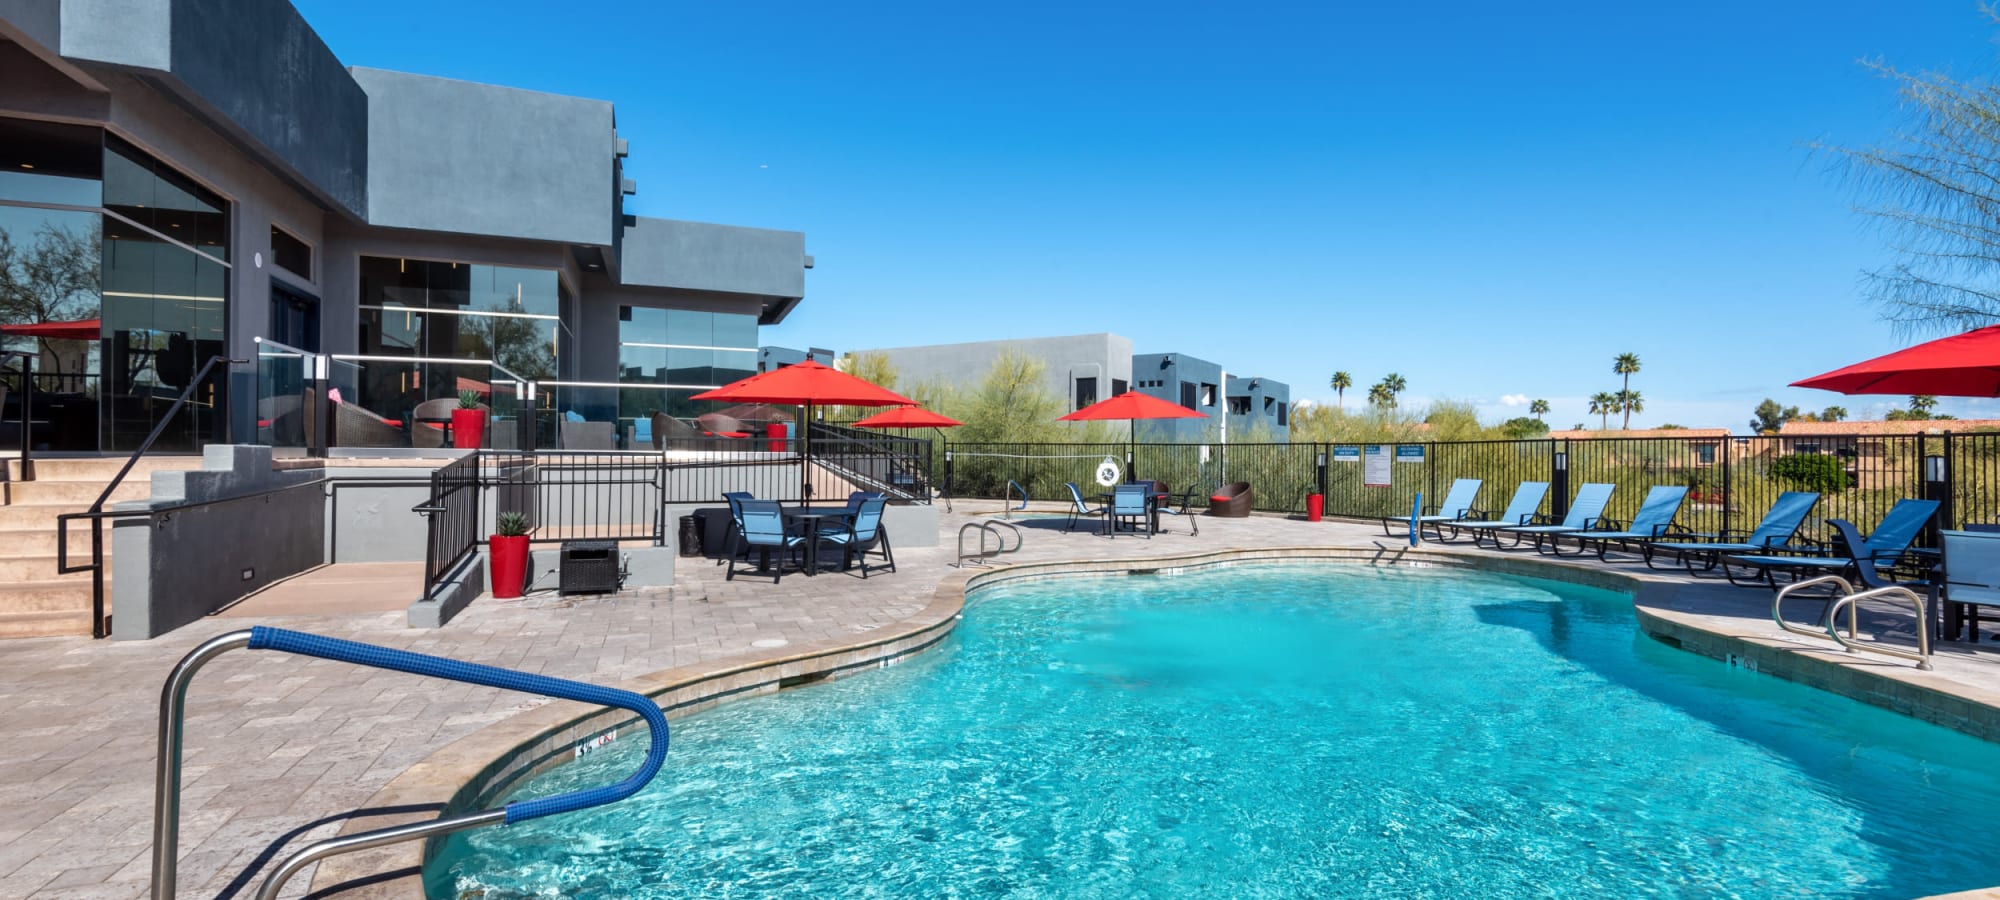 Amazing swimming pool on a gorgeous day at Luna at Fountain Hills in Fountain Hills, Arizona